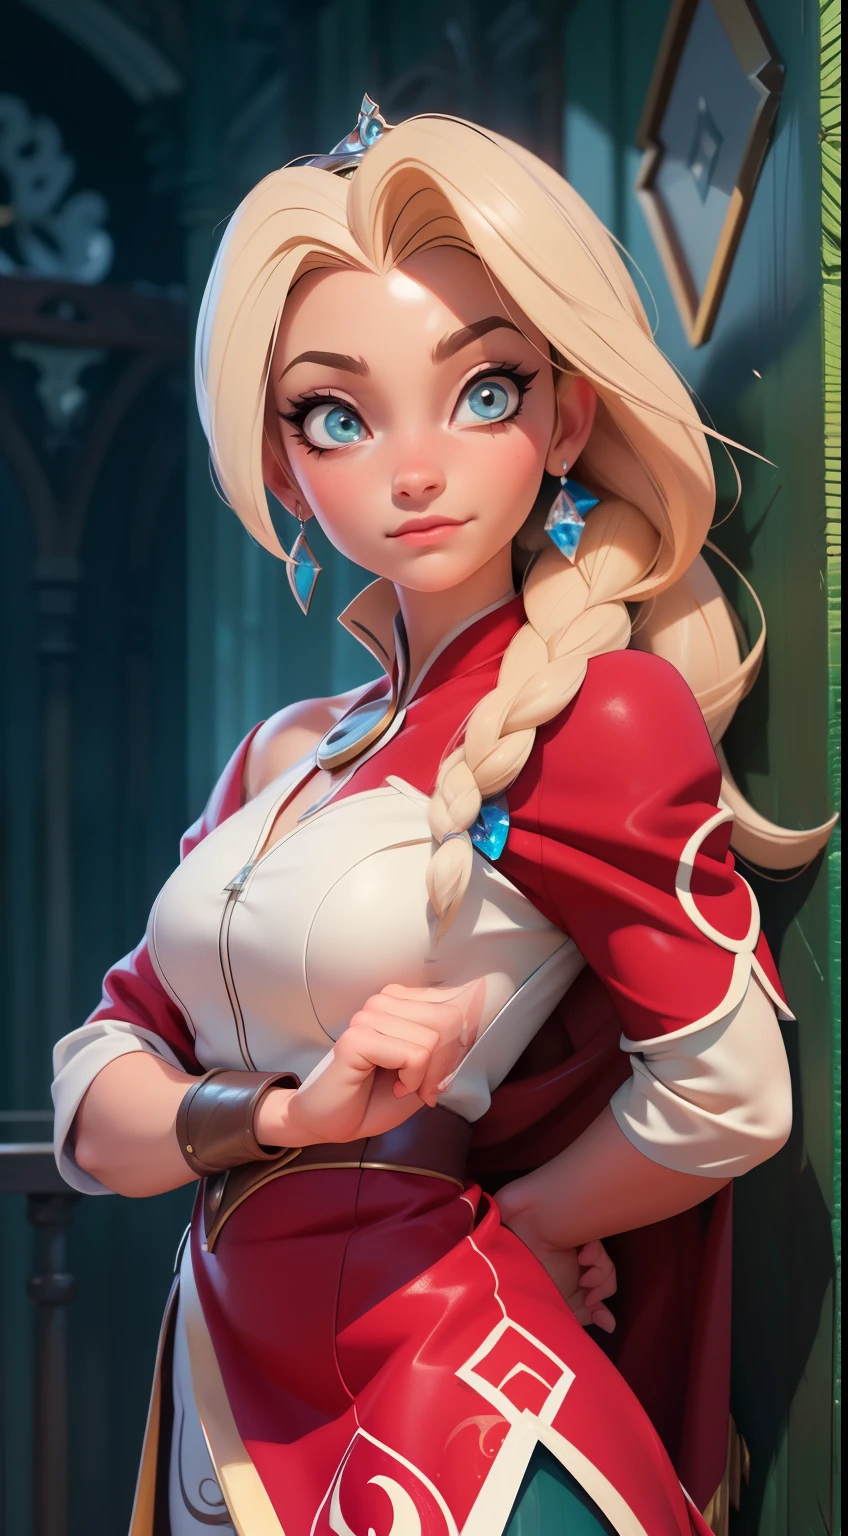 Elsa-Sakura Fusion, Merging models, melting, Wearing Sakura&#39;s clothes, In village, 1girl, Beautiful, Character, Woman, Female, (master part:1.2), (best qualityer:1.2), (独奏:1.2), ((struggling pose)), ((field of battle)), cinemactic, perfects eyes, perfect  skin, perfect lighting, sorrido, Lumiere, Farbe, texturized skin, detail, Beauthfull, wonder wonder wonder wonder wonder wonder wonder wonder wonder wonder wonder wonder wonder wonder wonder wonder wonder wonder wonder wonder wonder wonder wonder wonder wonder wonder wonder wonder wonder wonder wonder wonder, ultra detali, face perfect